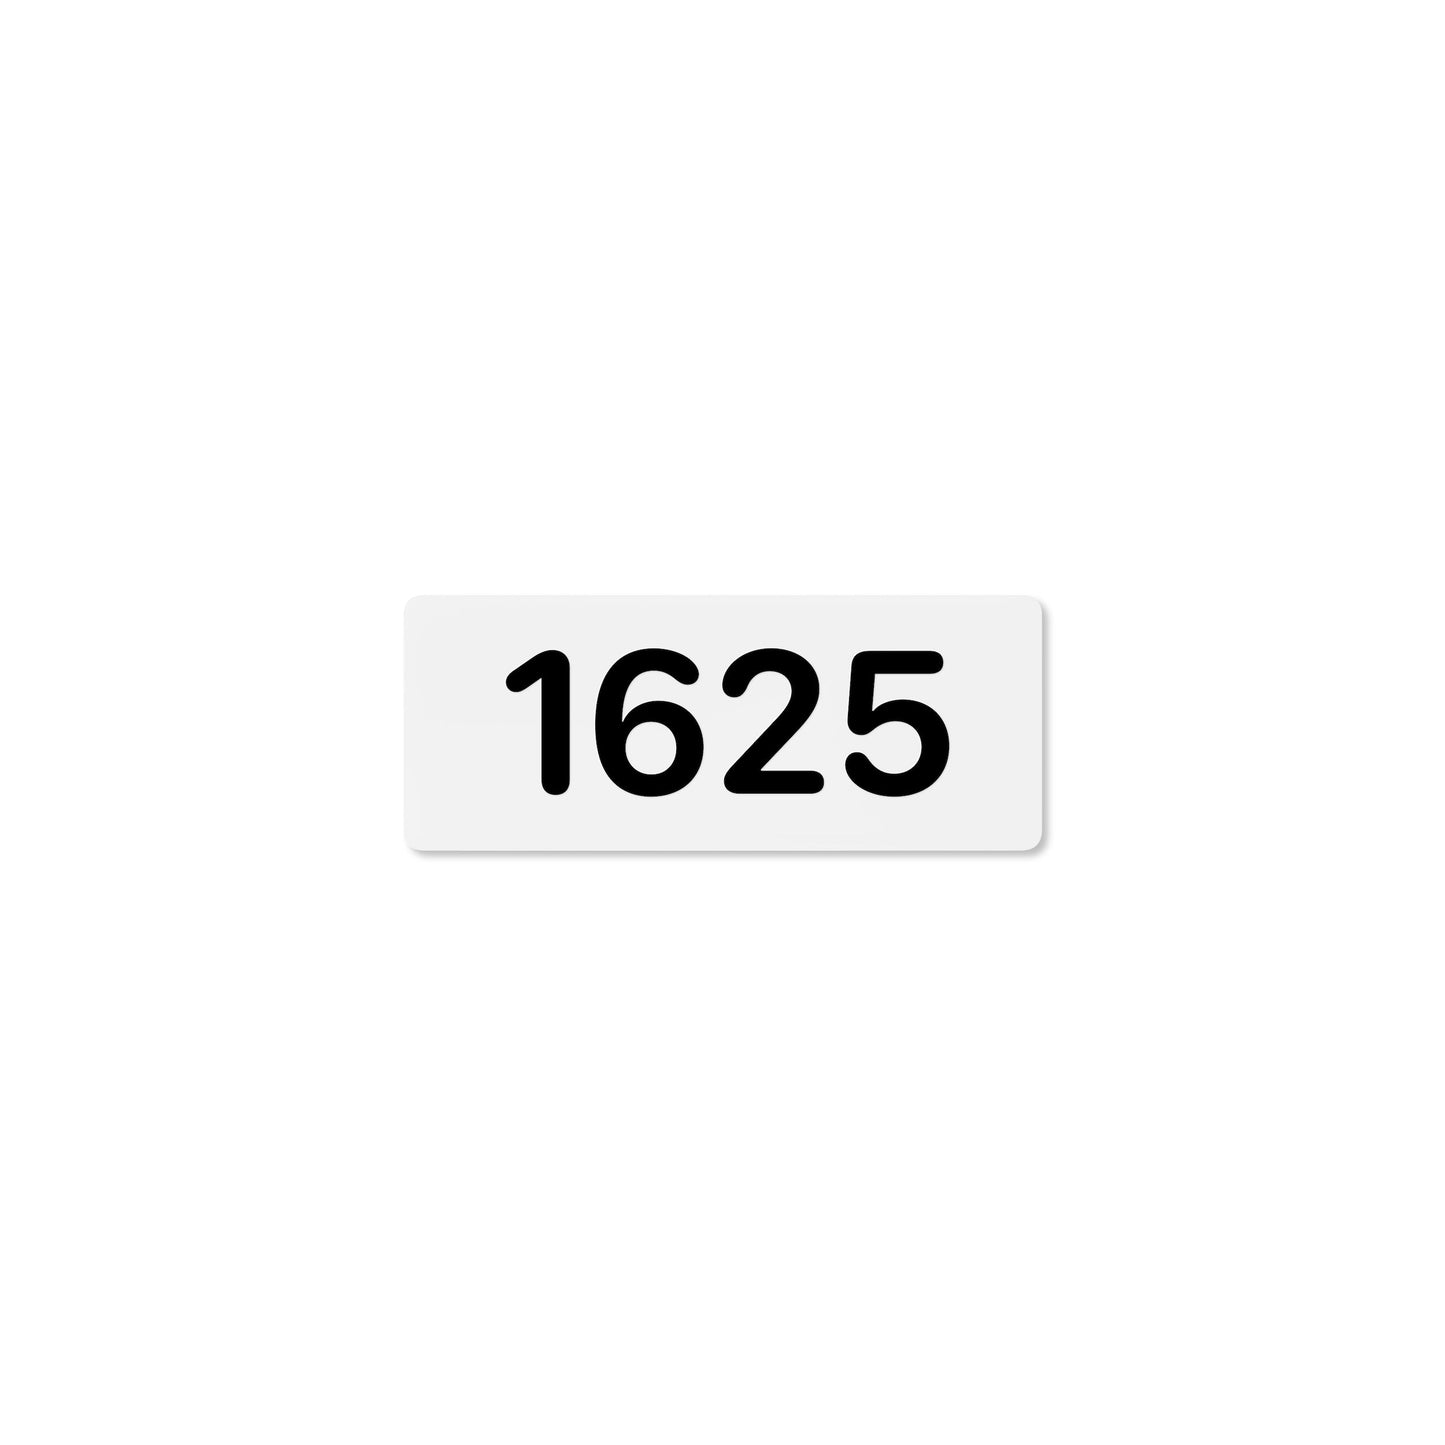 Numeral 1625